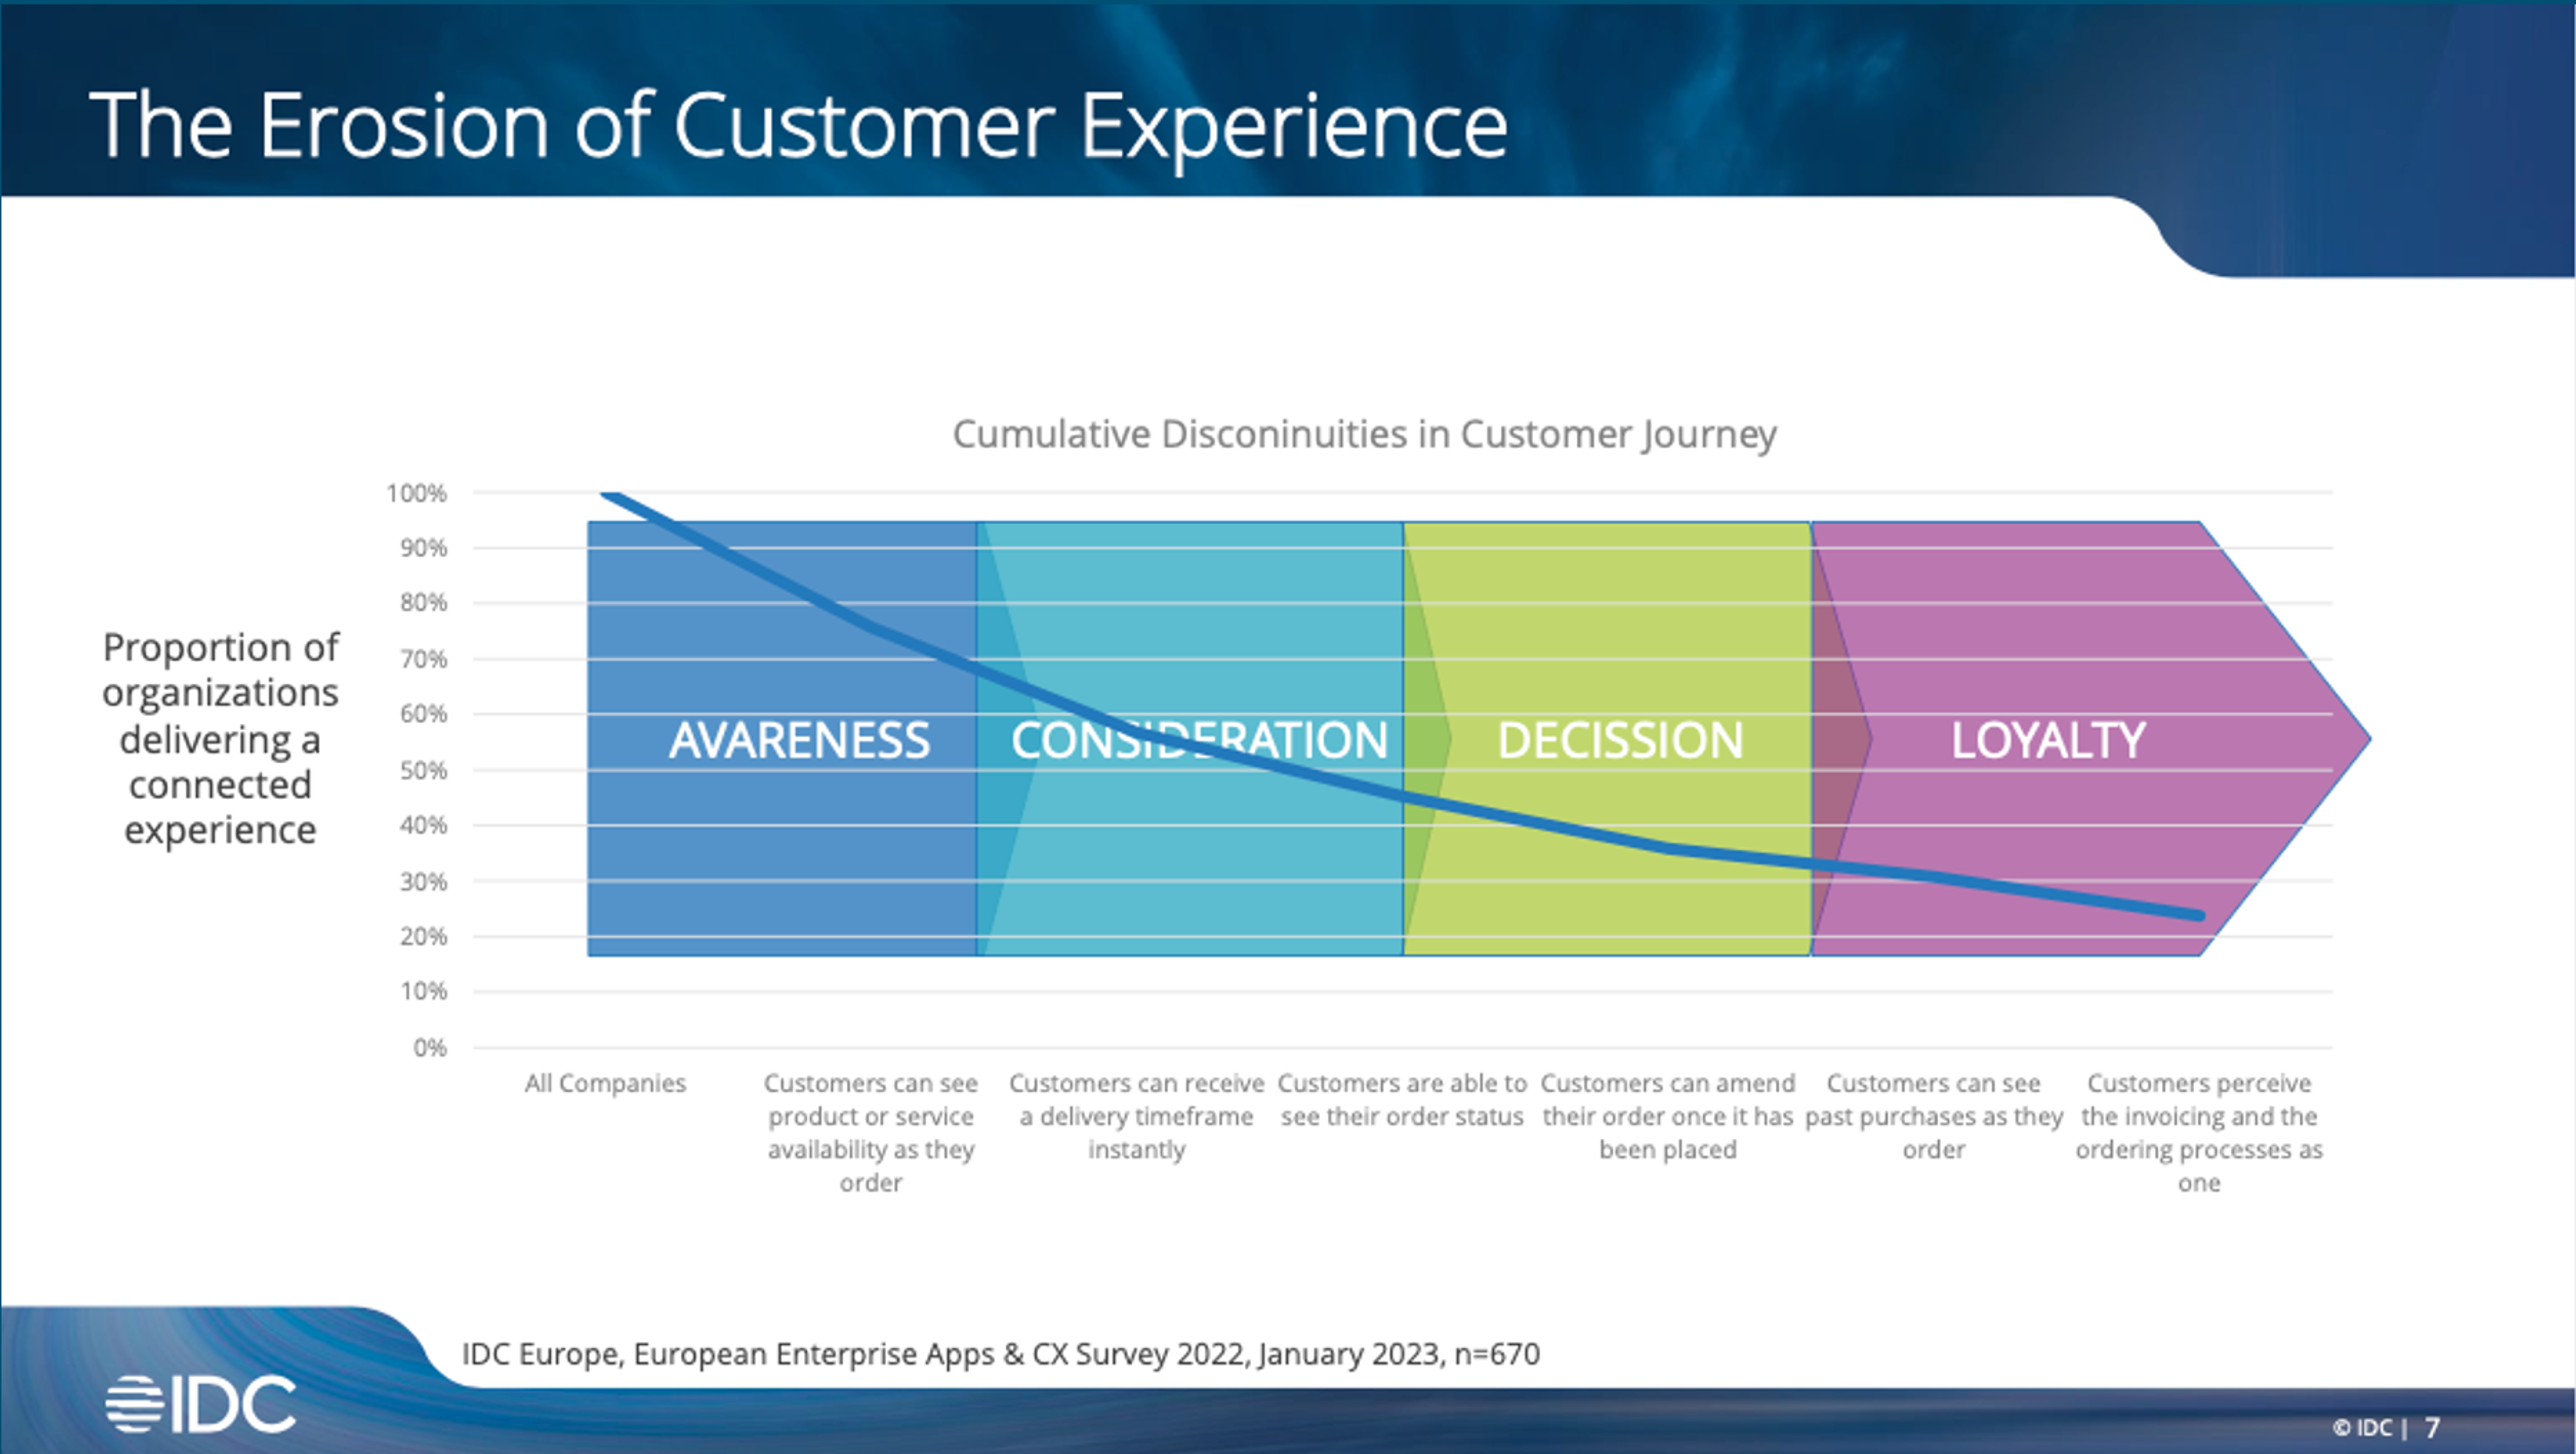 The Erosion of Customer Experience by IDC